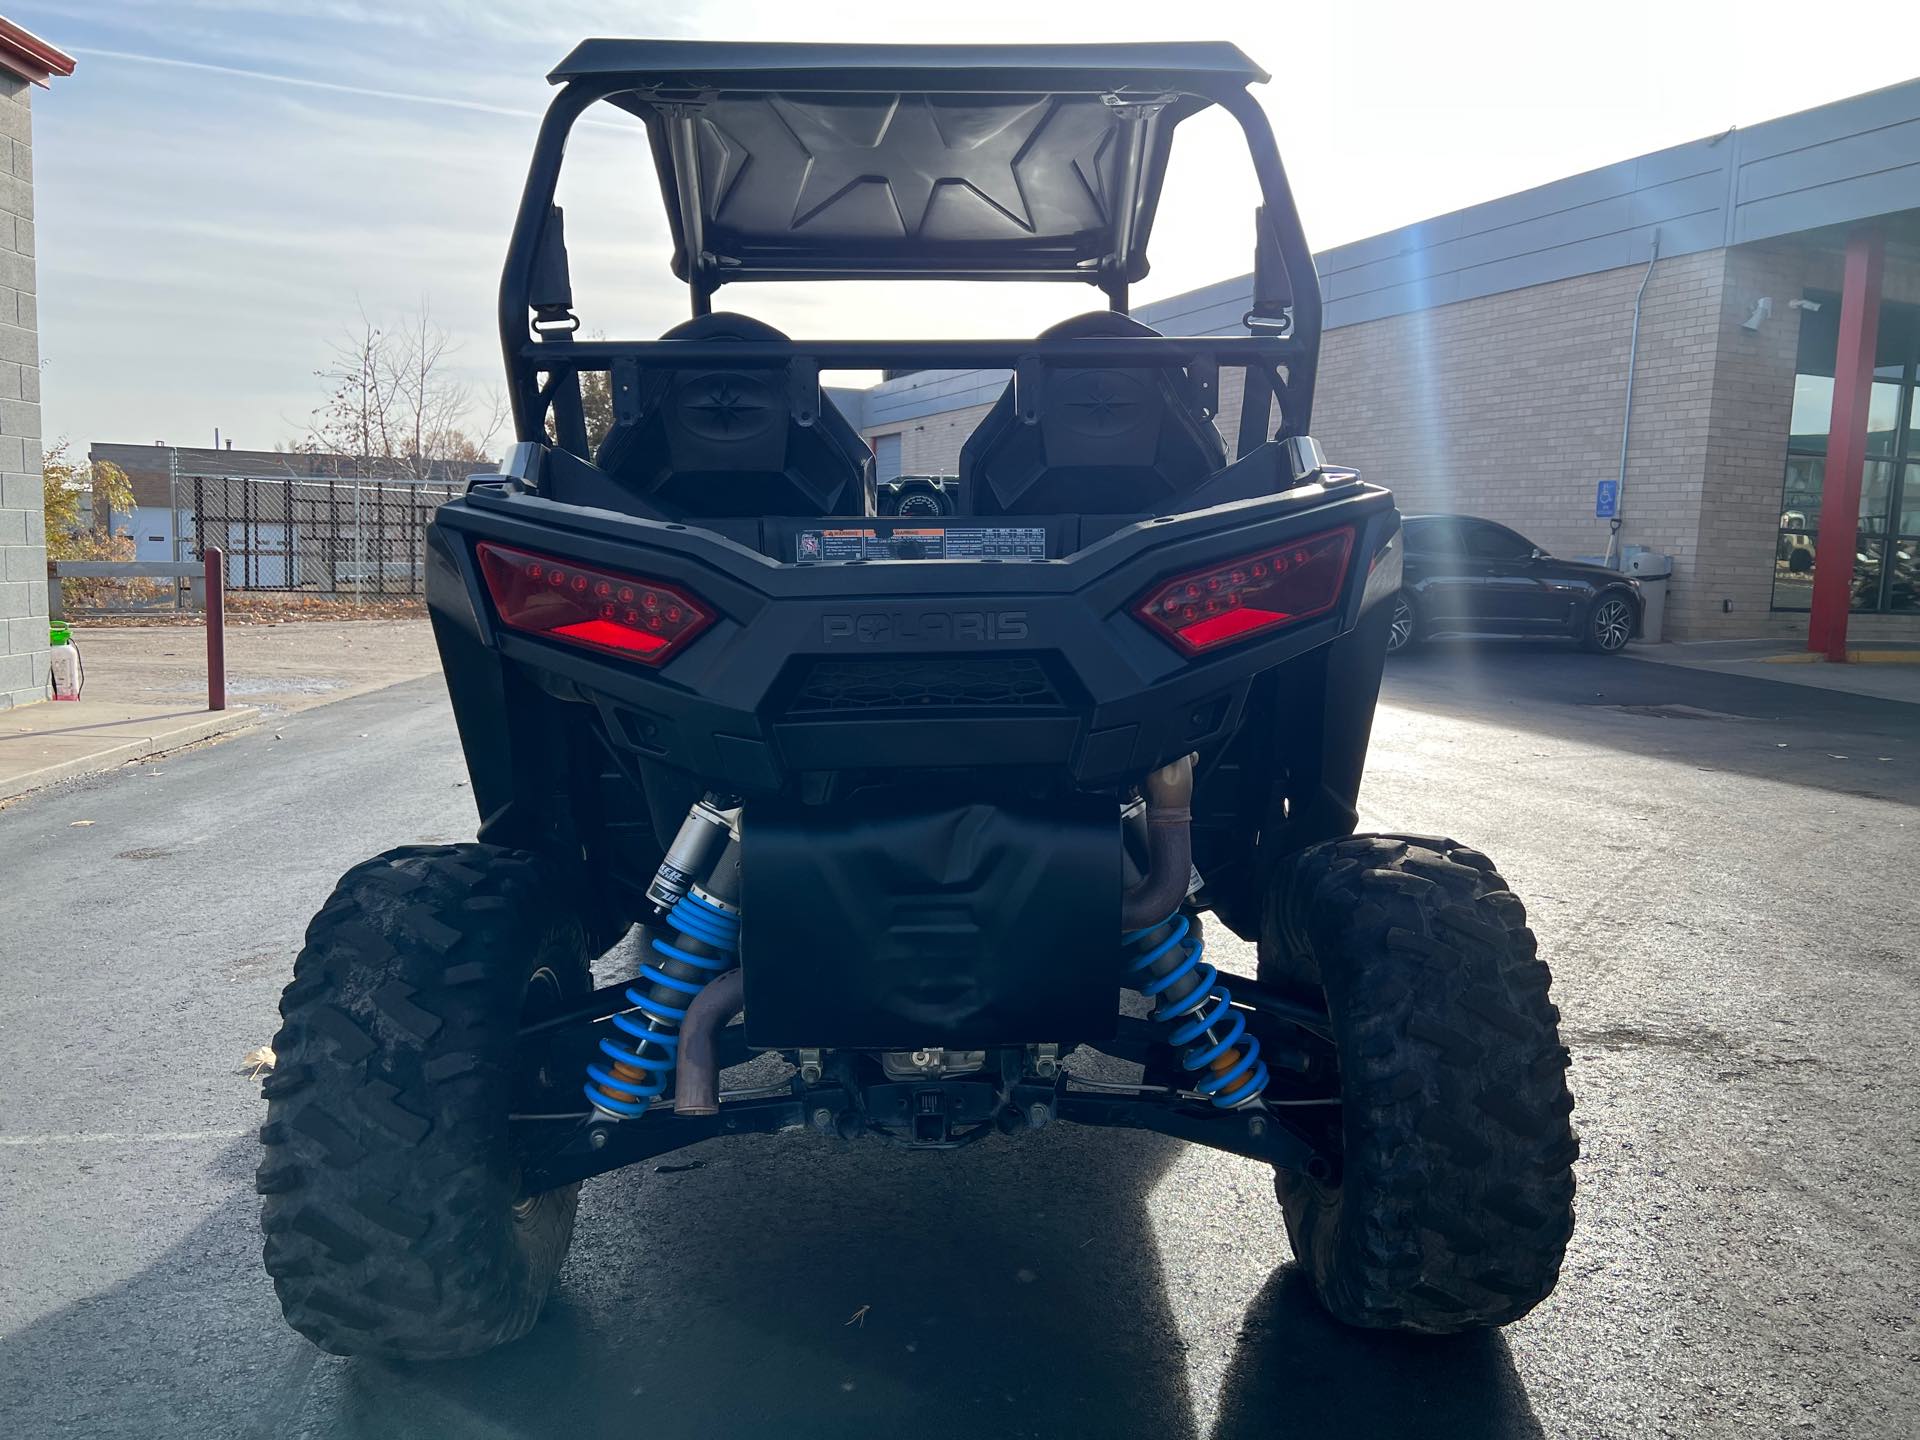 2020 Polaris RZR S 1000 EPS at Aces Motorcycles - Fort Collins